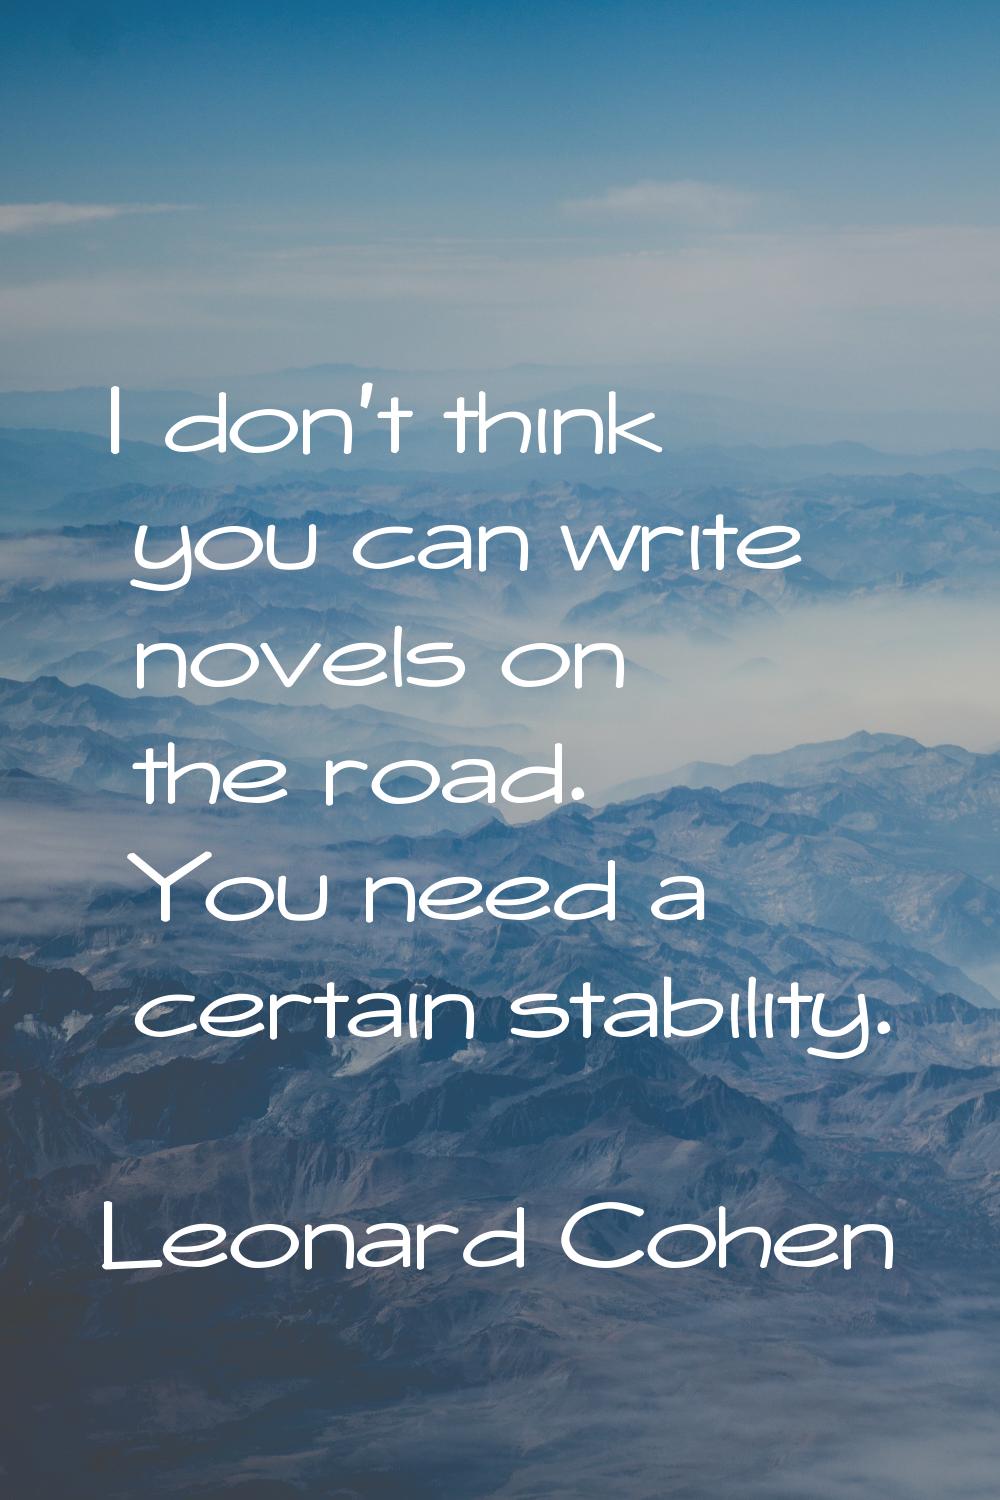 I don't think you can write novels on the road. You need a certain stability.